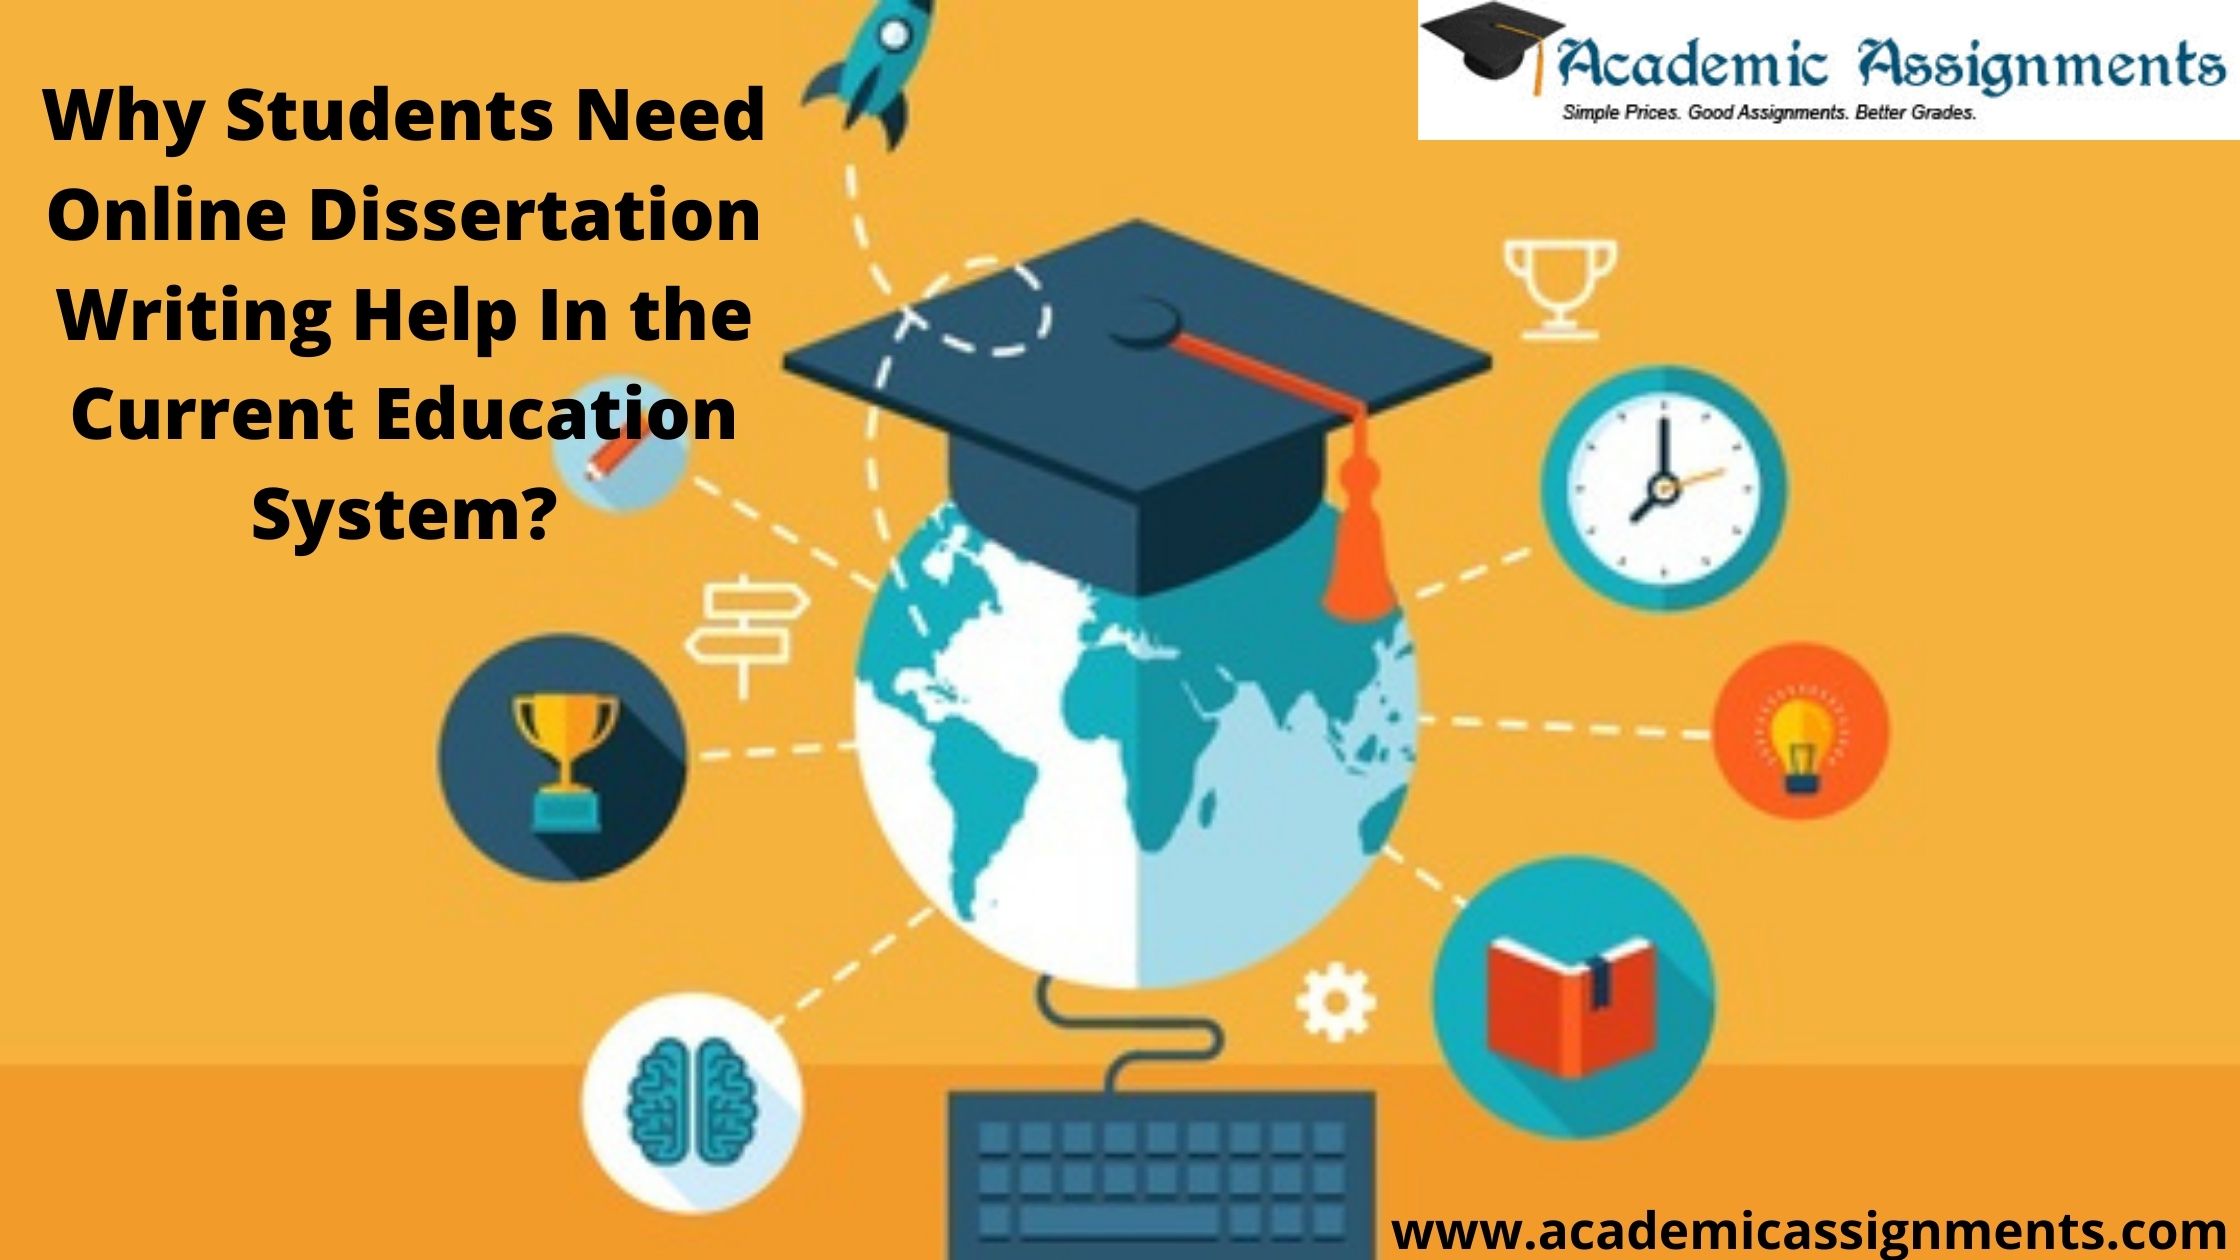 Why Students Need Online Dissertation Writing Help In the Current Education System